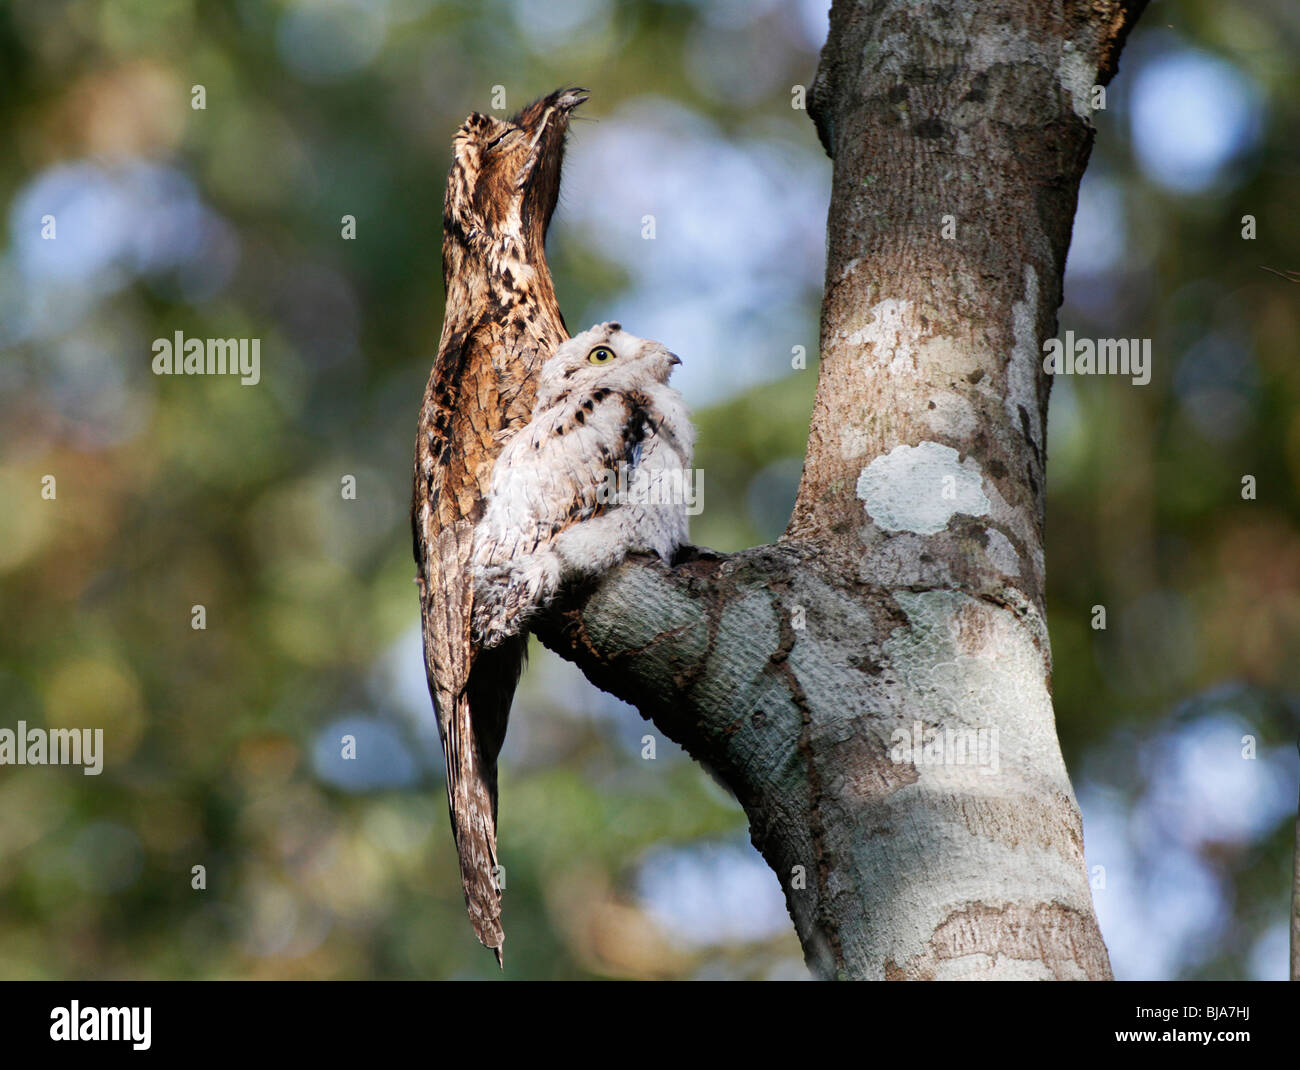 BT-225D, POTOO CHICK AND MOTHER IN TREE Stock Photo